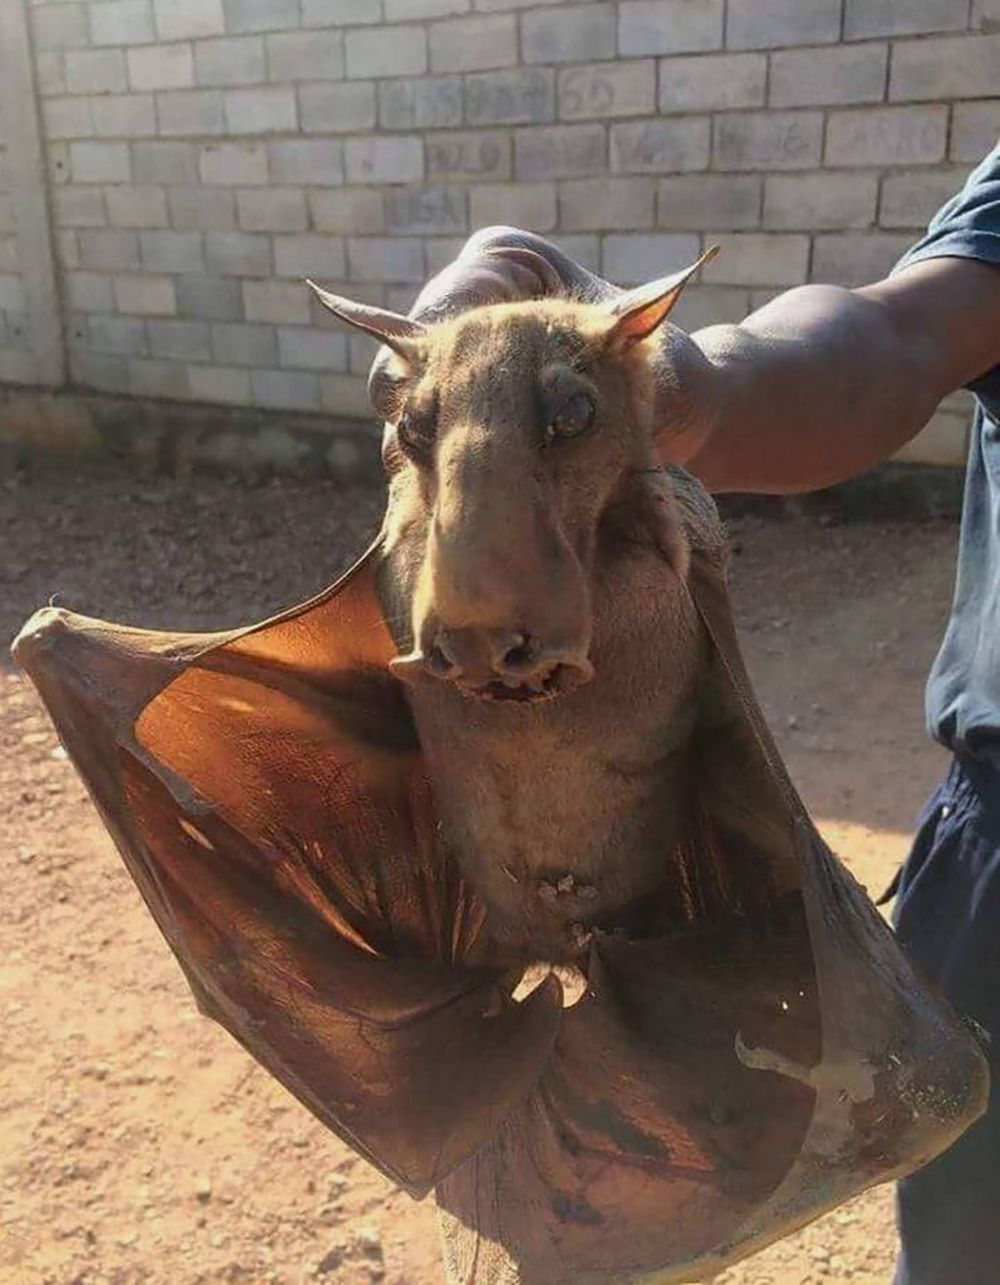 This hammer-headed bat looks unnaturally large because it is closer to the camera than its handler.